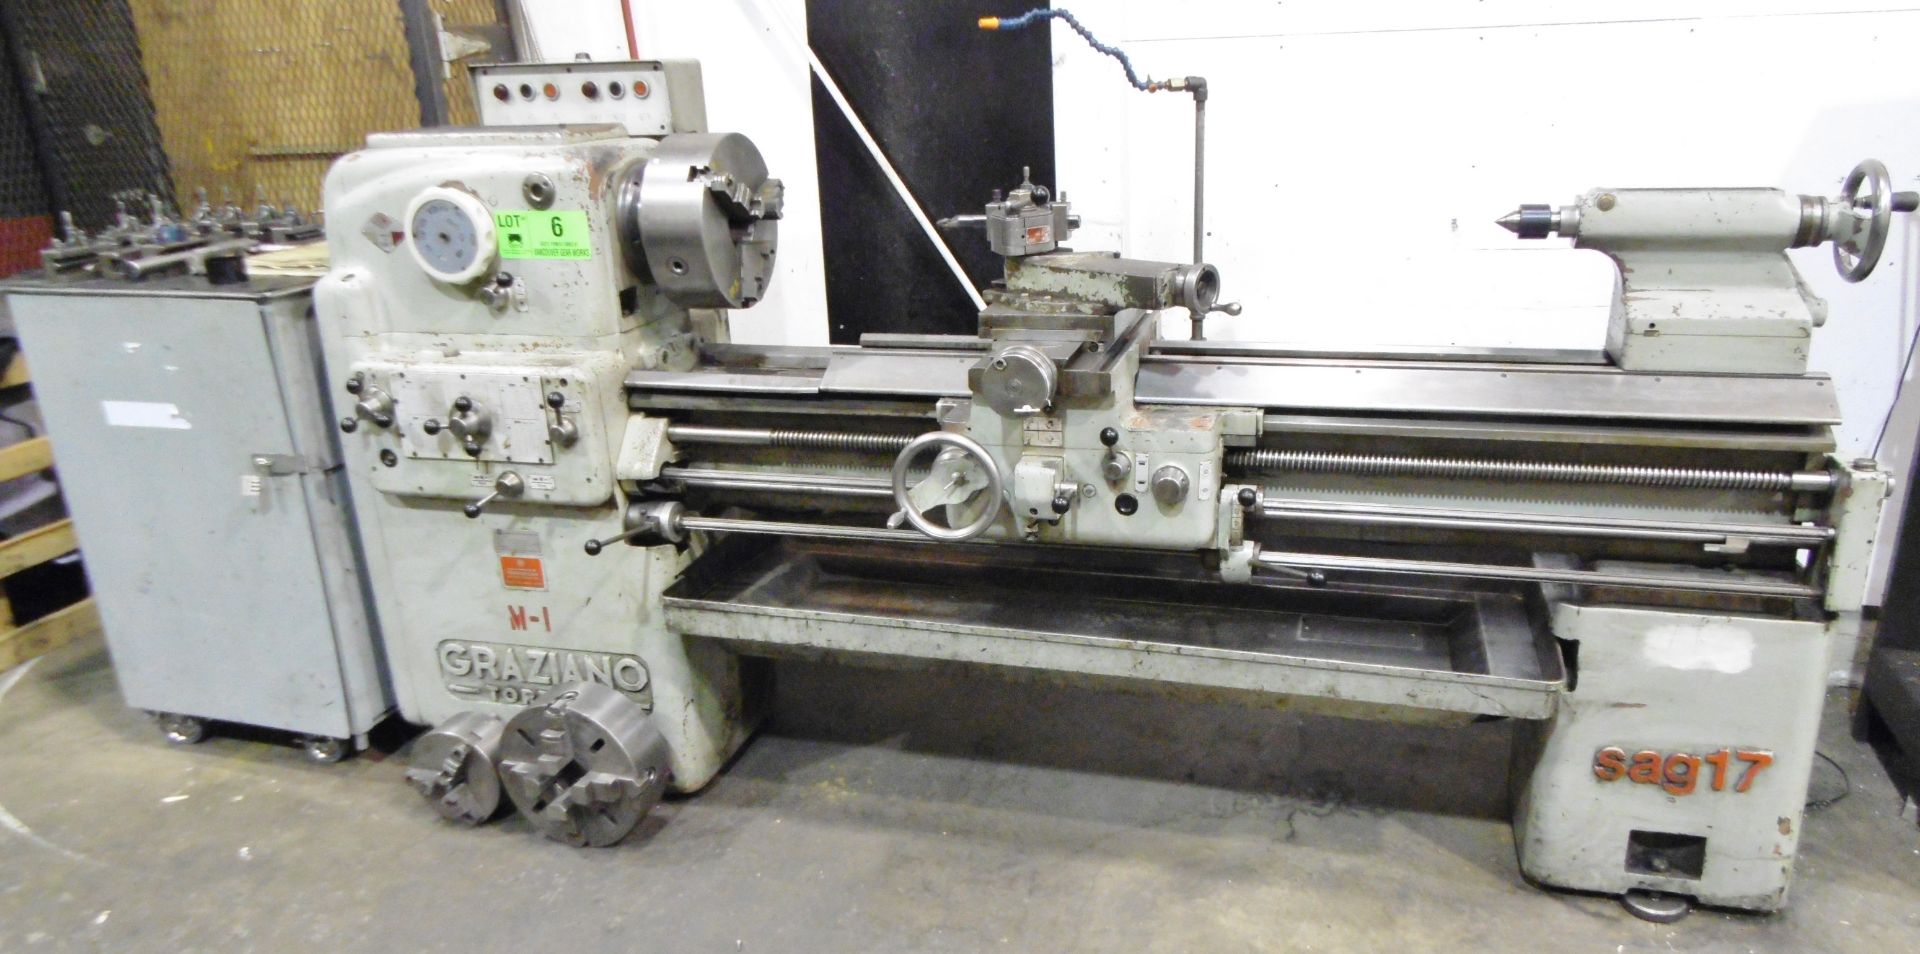 GRAZIANO SAG17 toolroom lathe with 20" swing, 54" centers, 2" spindle bore, 40-1500 RPM, inch/metric